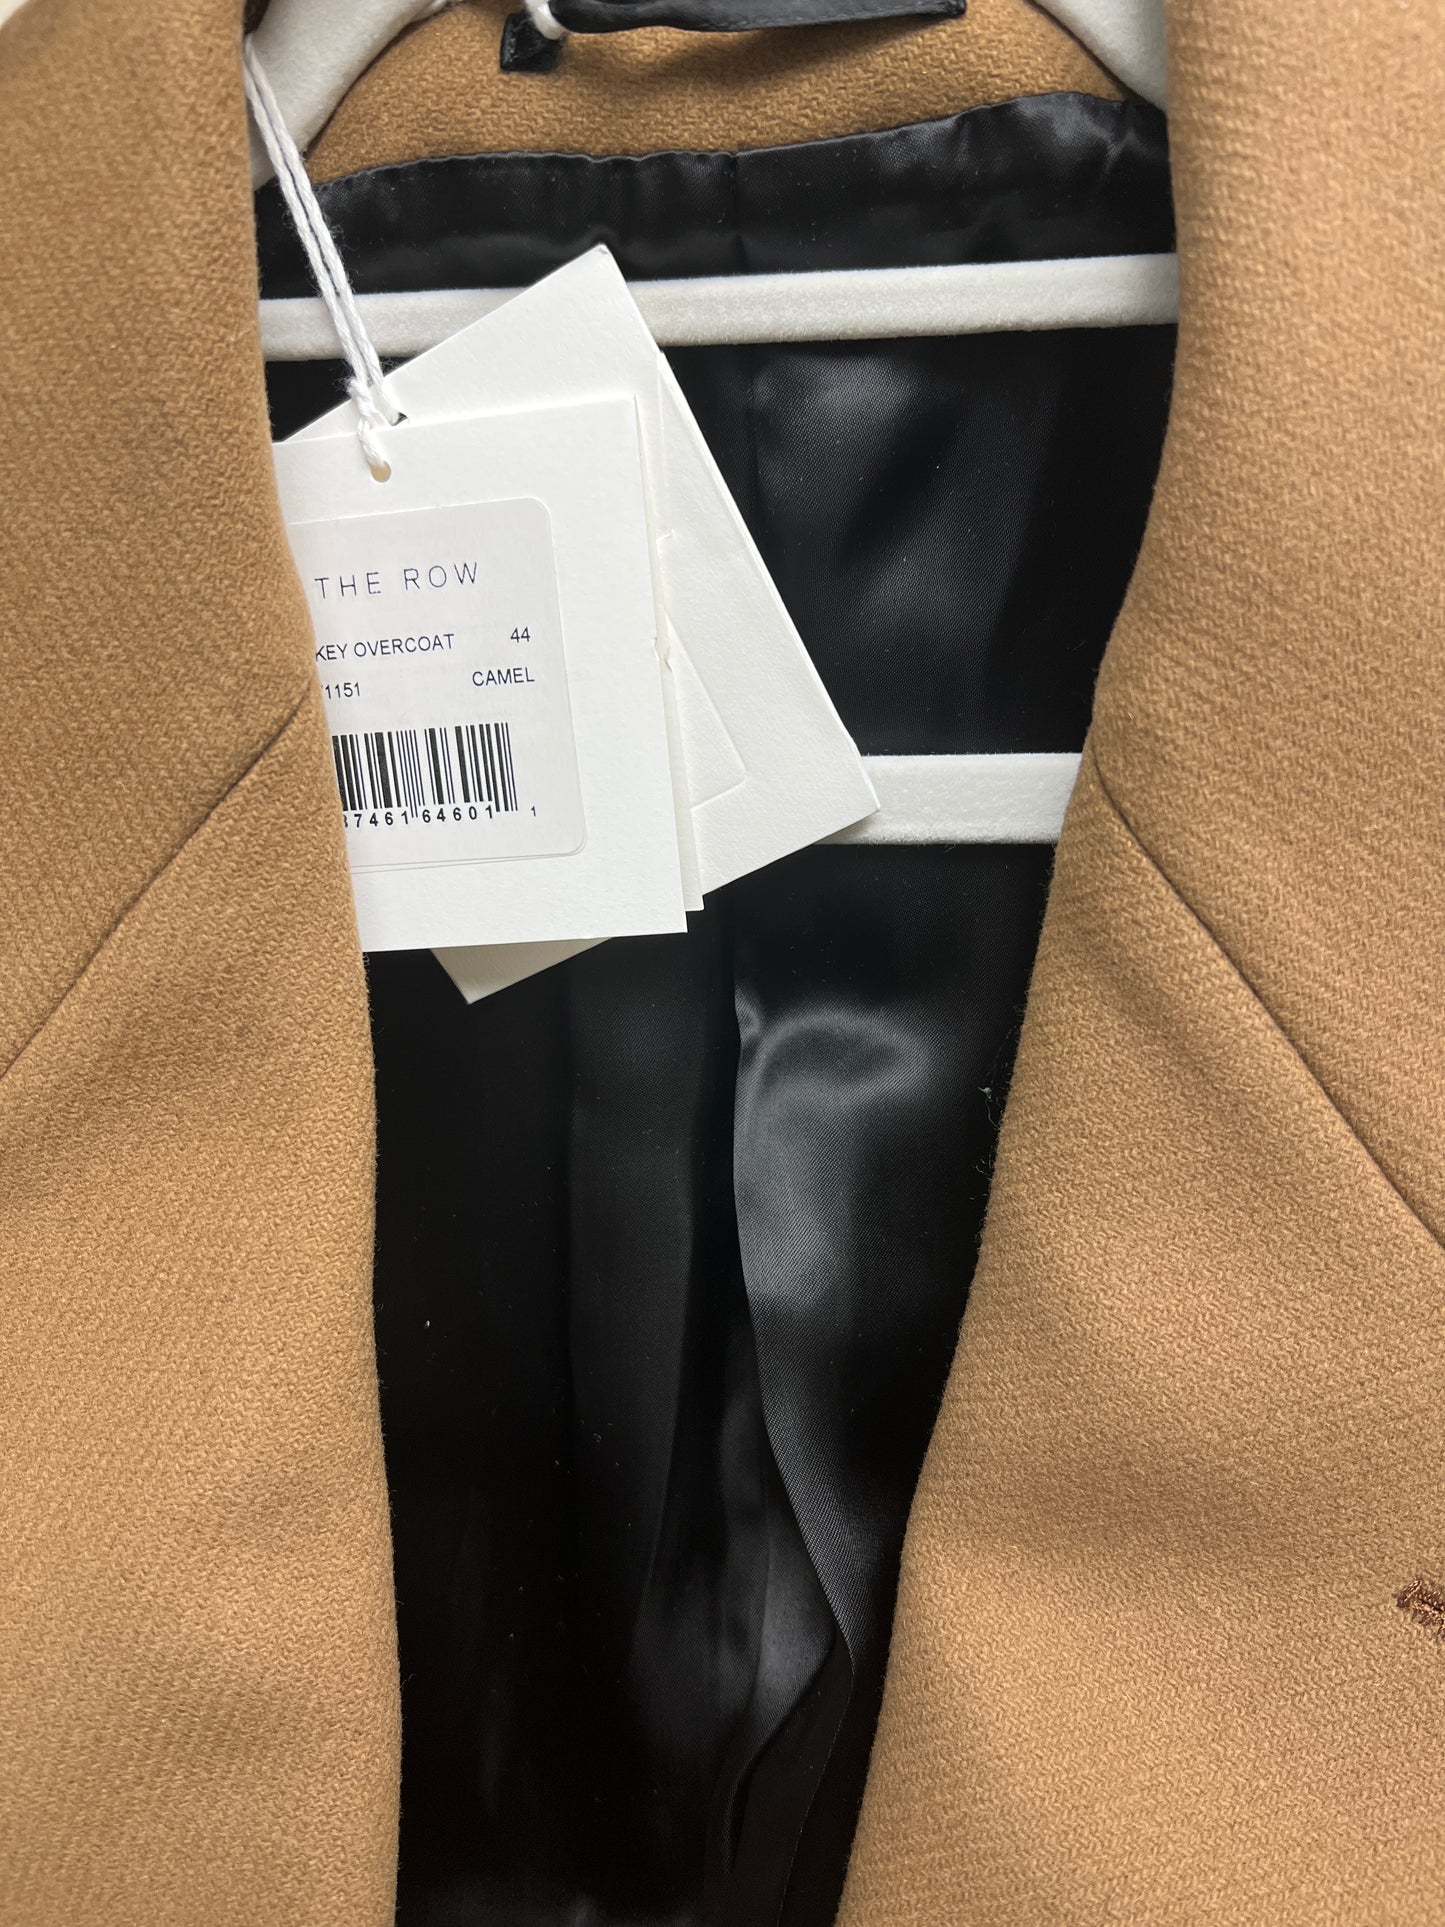 THE ROW Mickey Double-Breasted Wool Coat - Size44